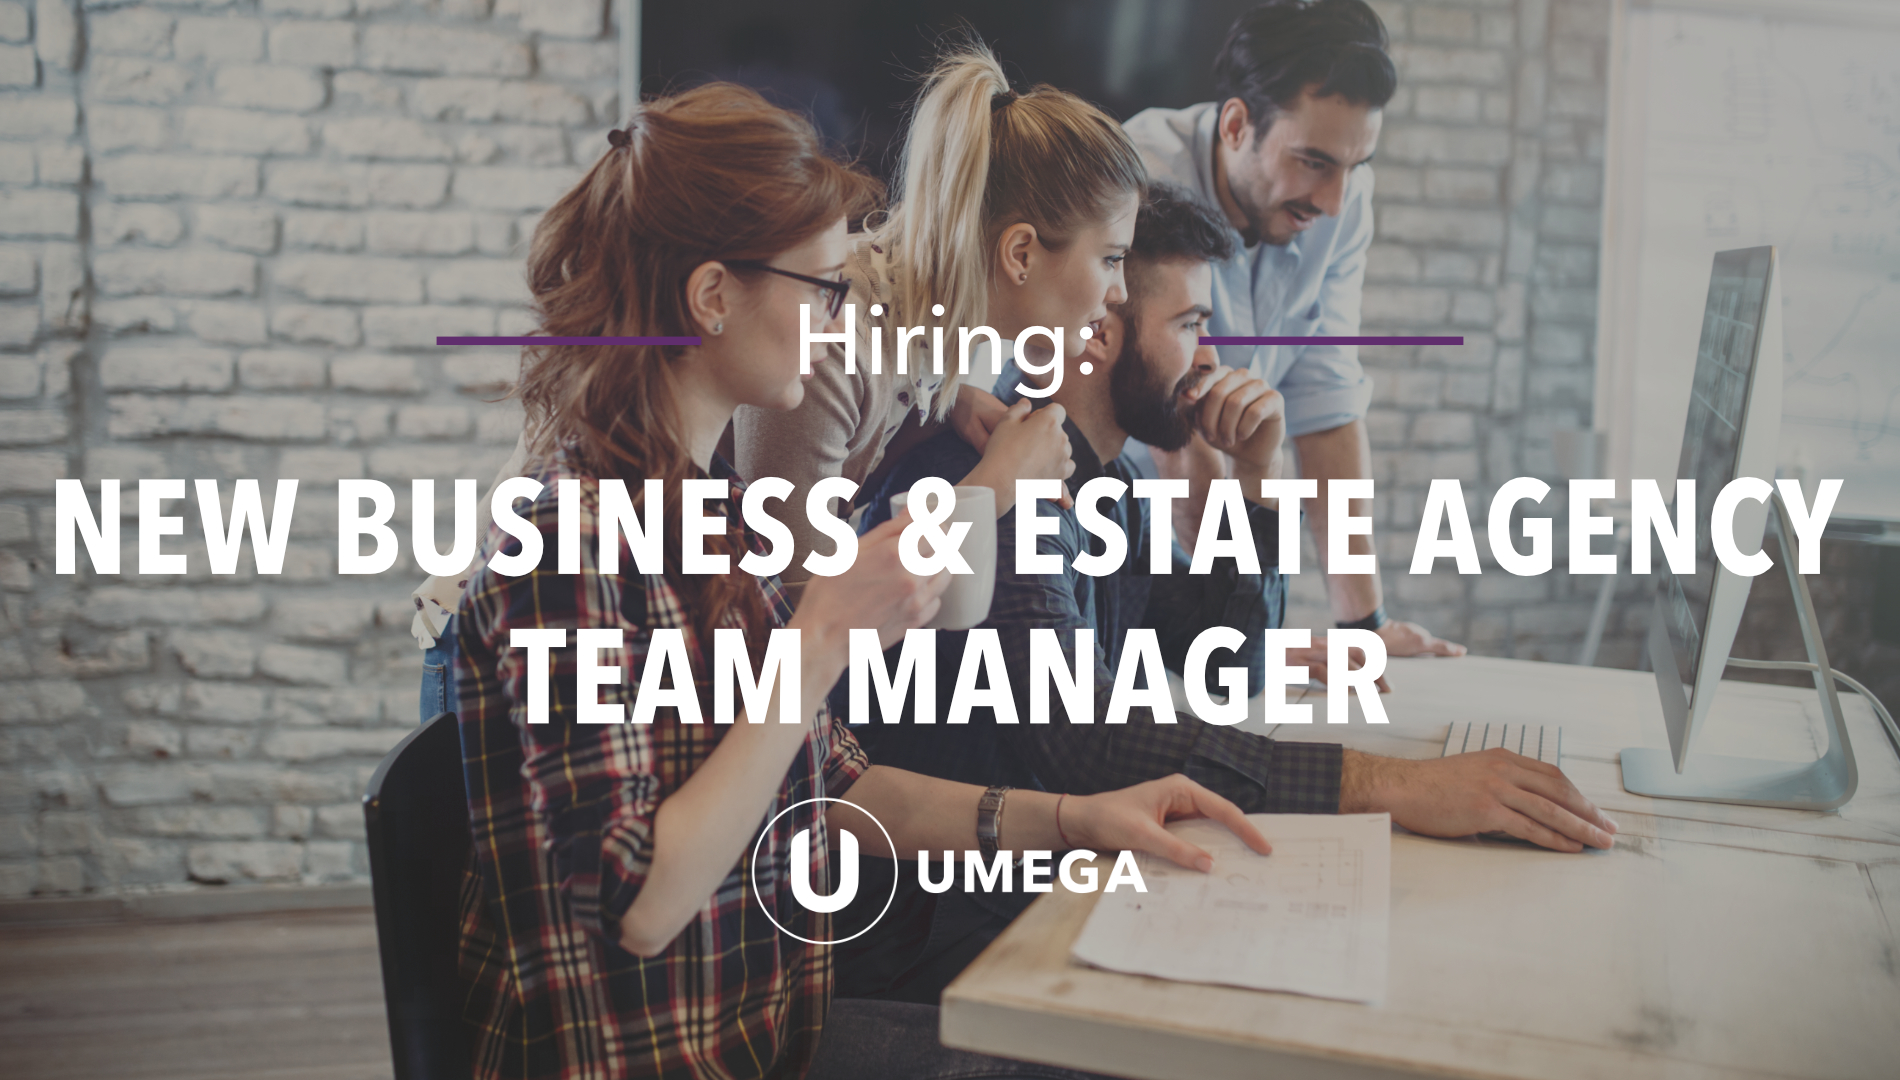 Hiring: New Business & Estate Agency Team Manager - JOB AD CLOSED